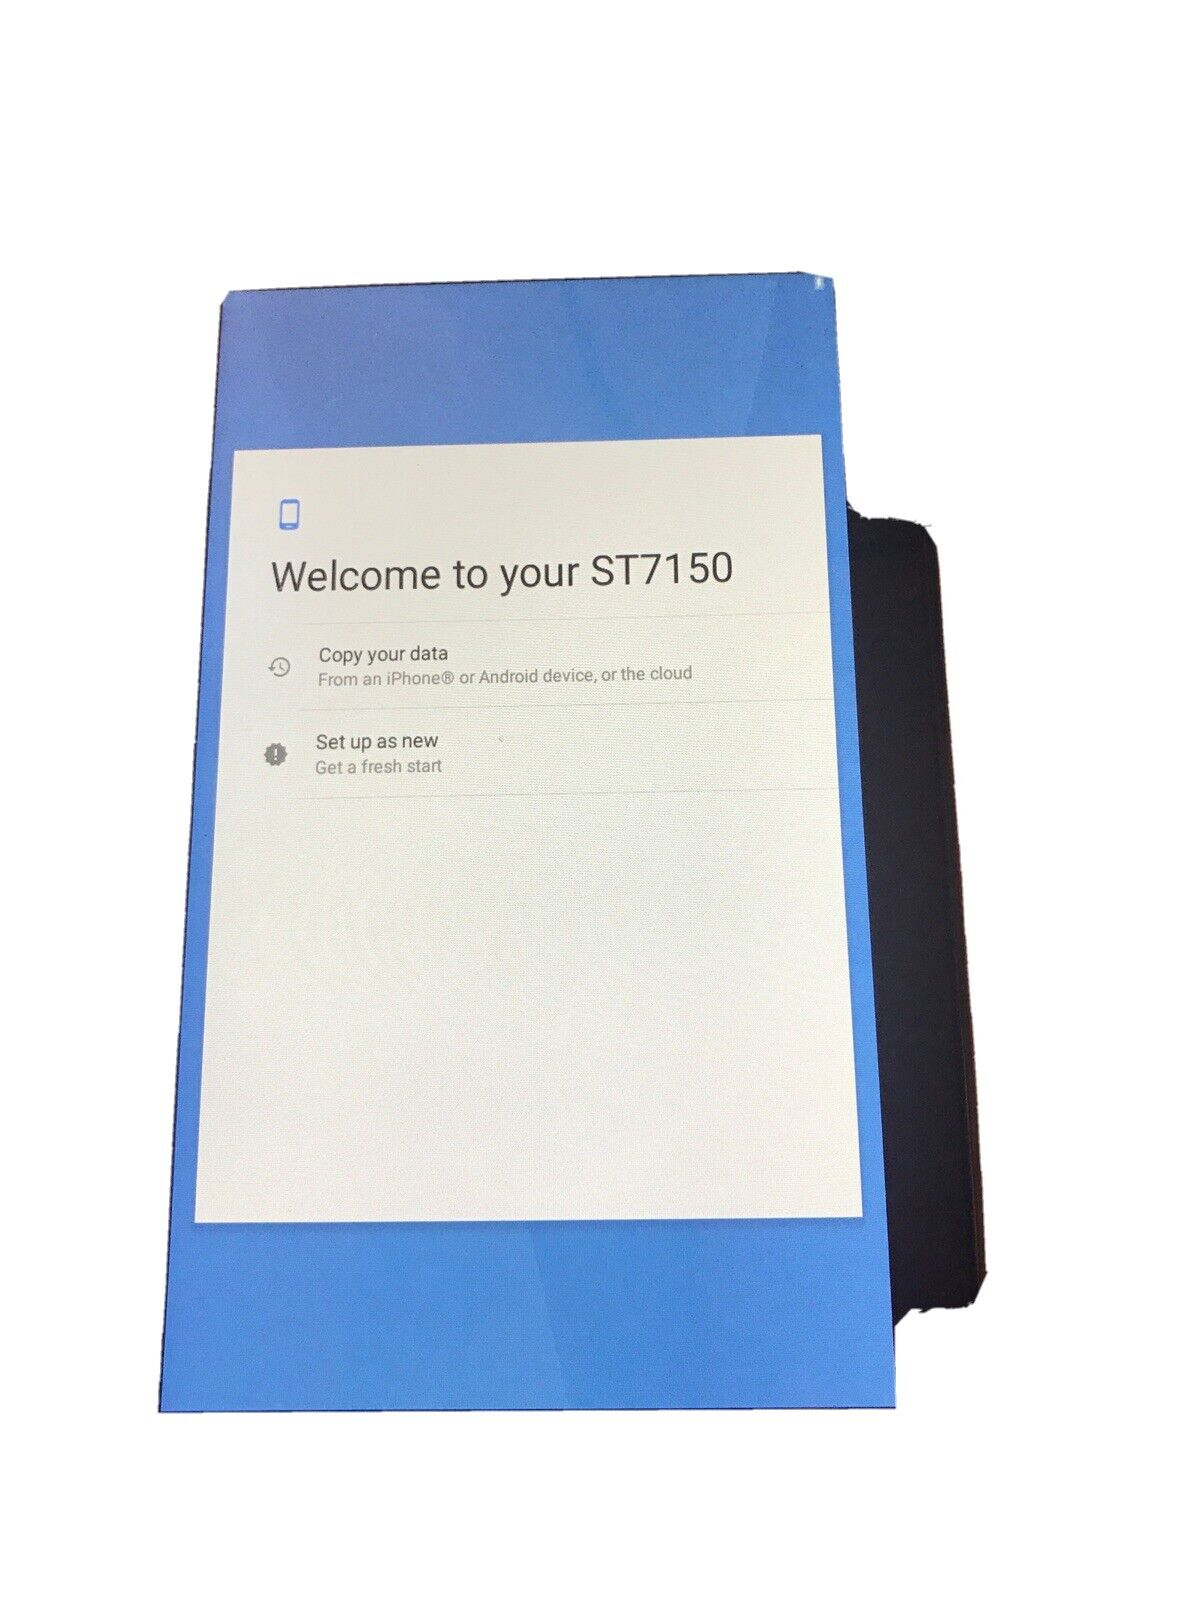 Smartab 7" 16GB Black Has Been Restored to Factory Settings